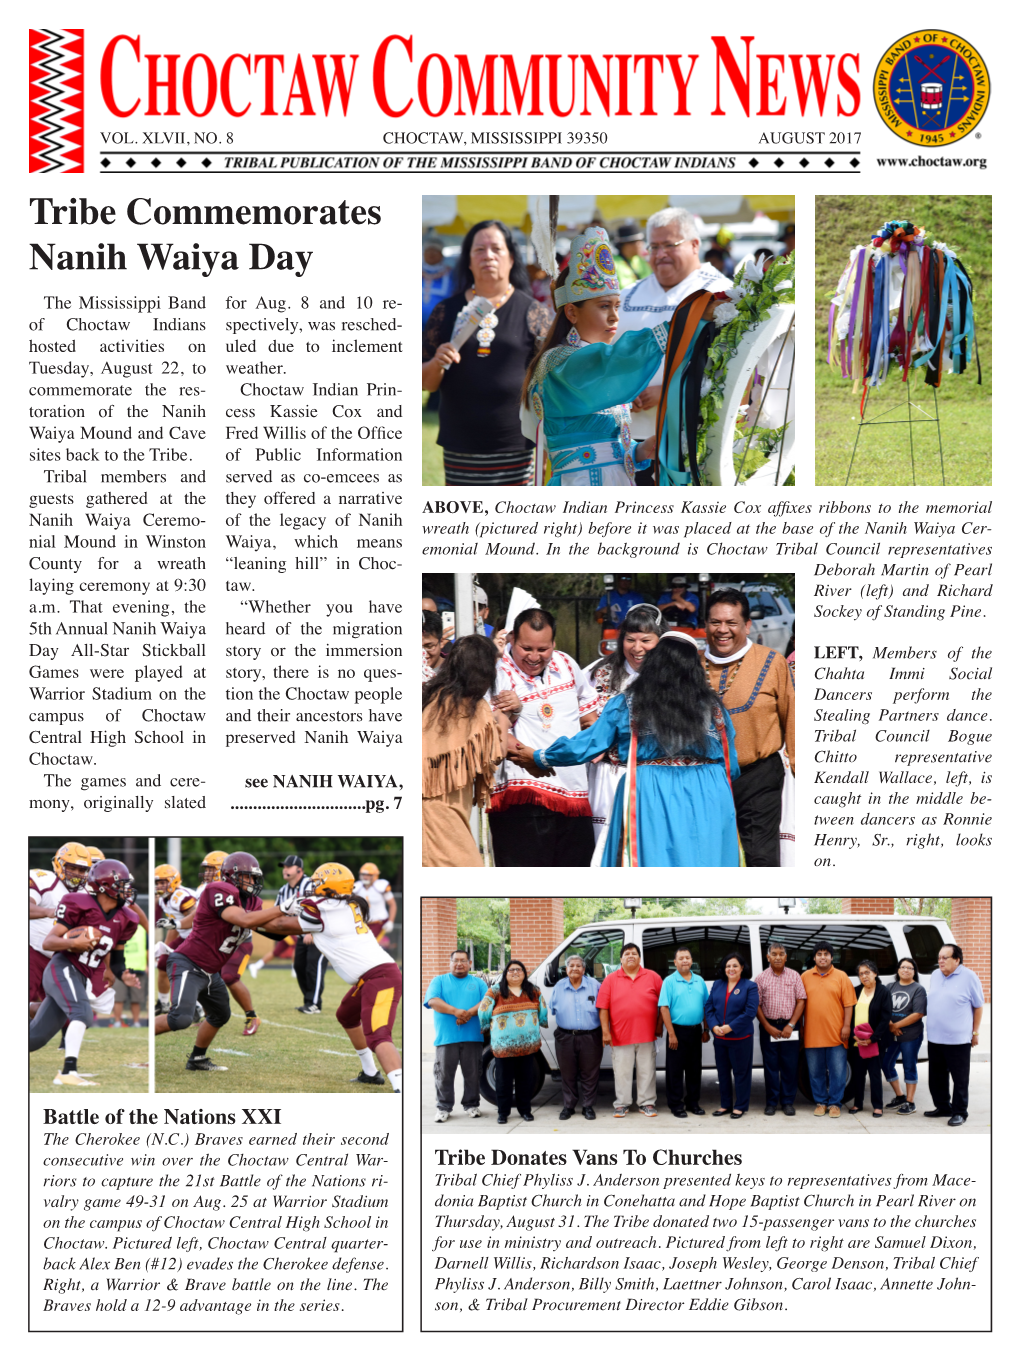 Tribe Commemorates Nanih Waiya Day the Mississippi Band for Aug